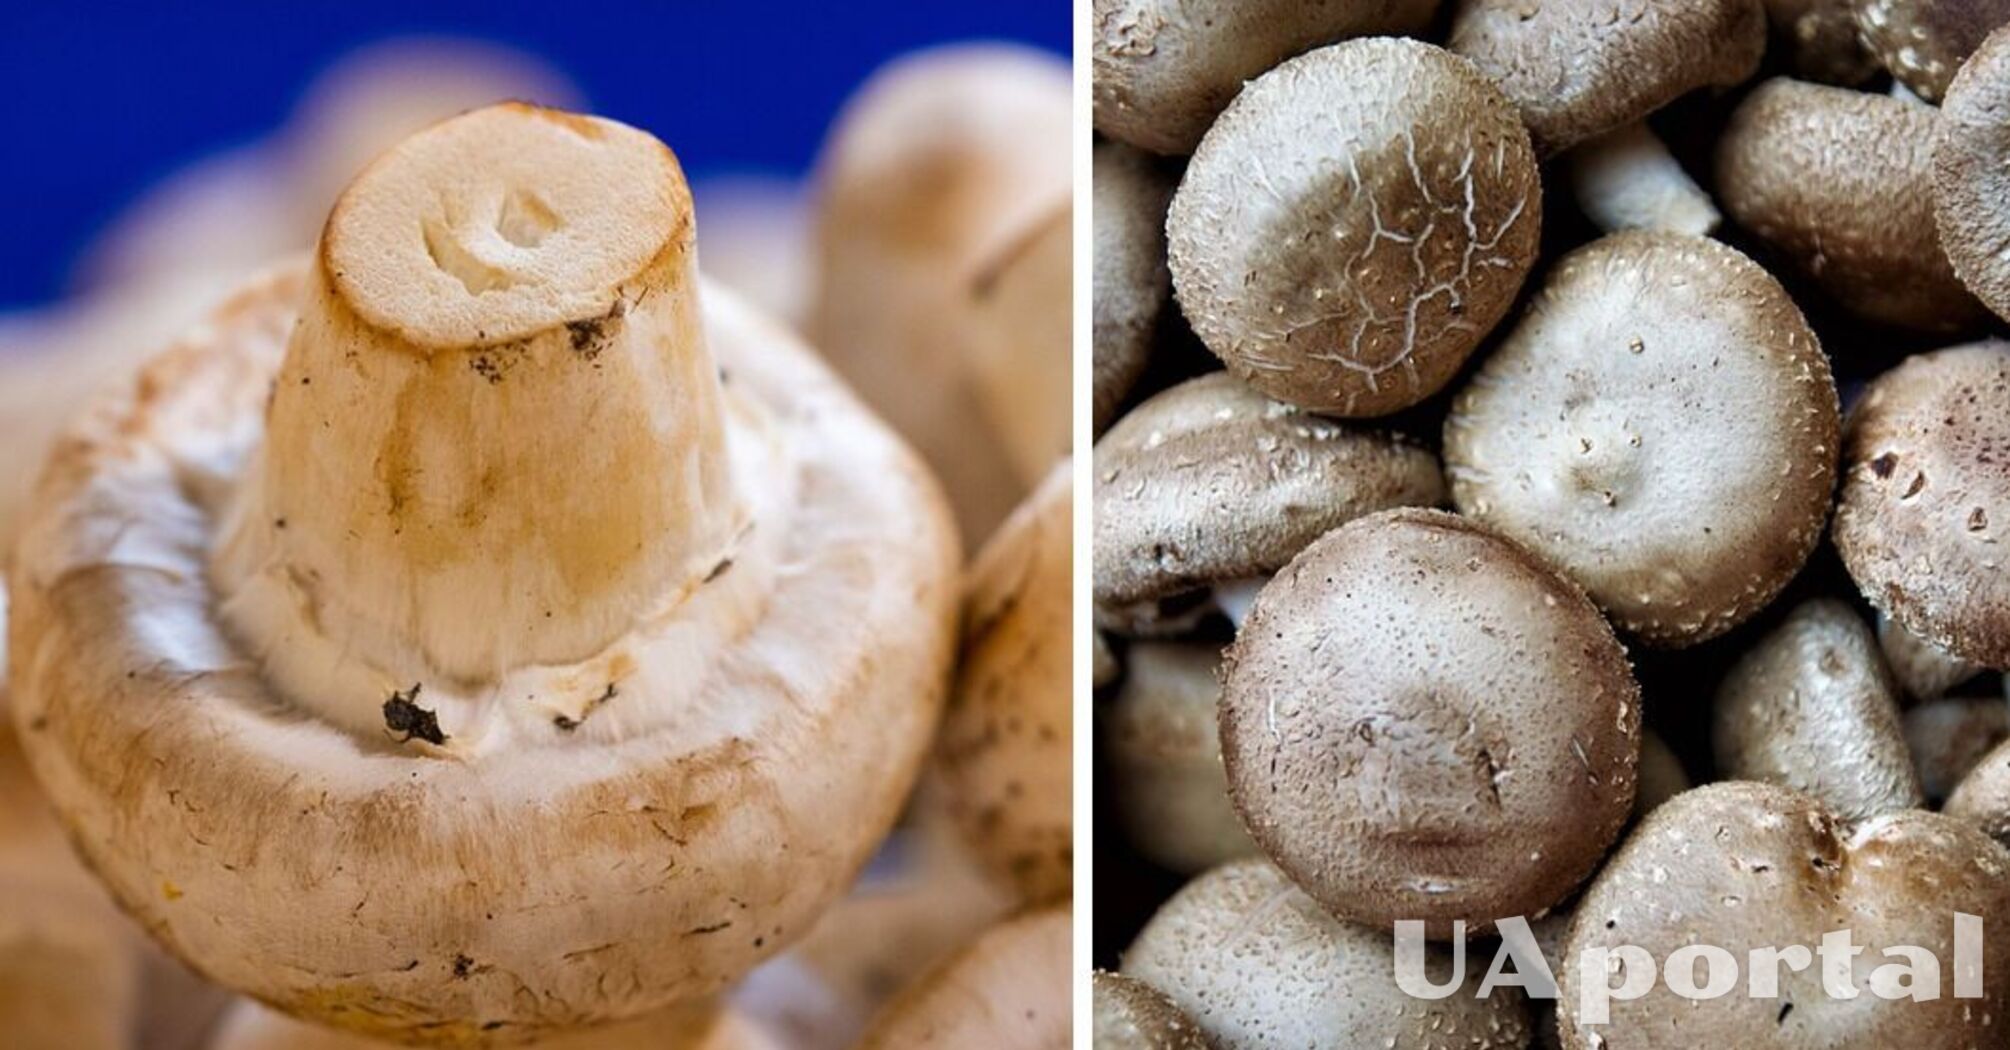 Experts explain how to keep mushrooms fresh and firm for as long as possible